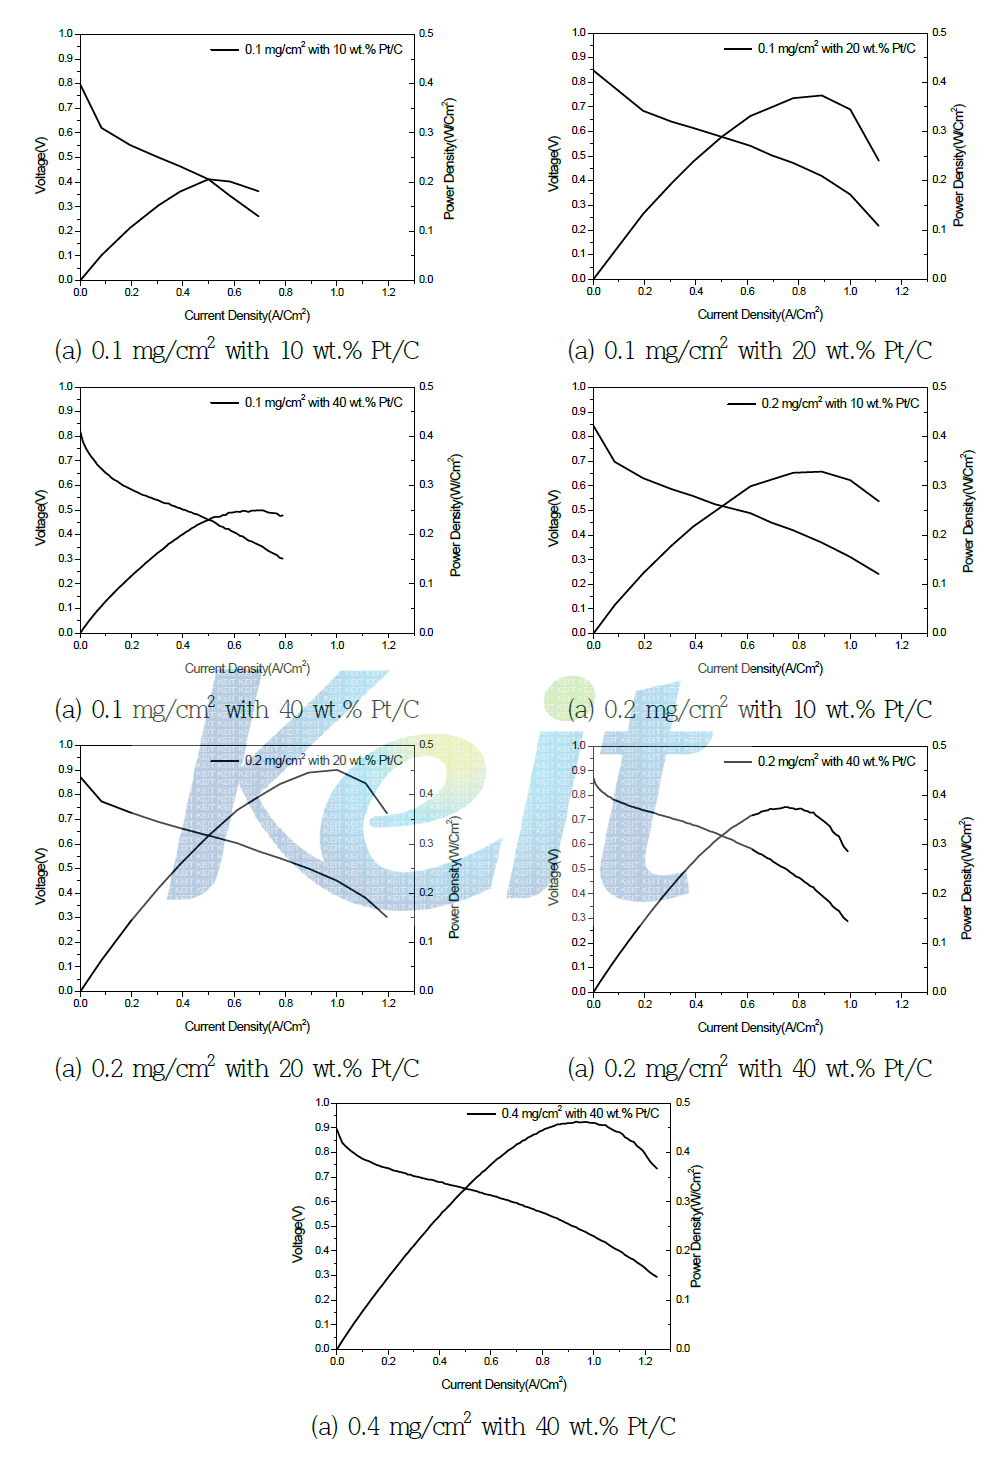 curves of MEAs according to Pt content in catalyst and Pt loading in cathode